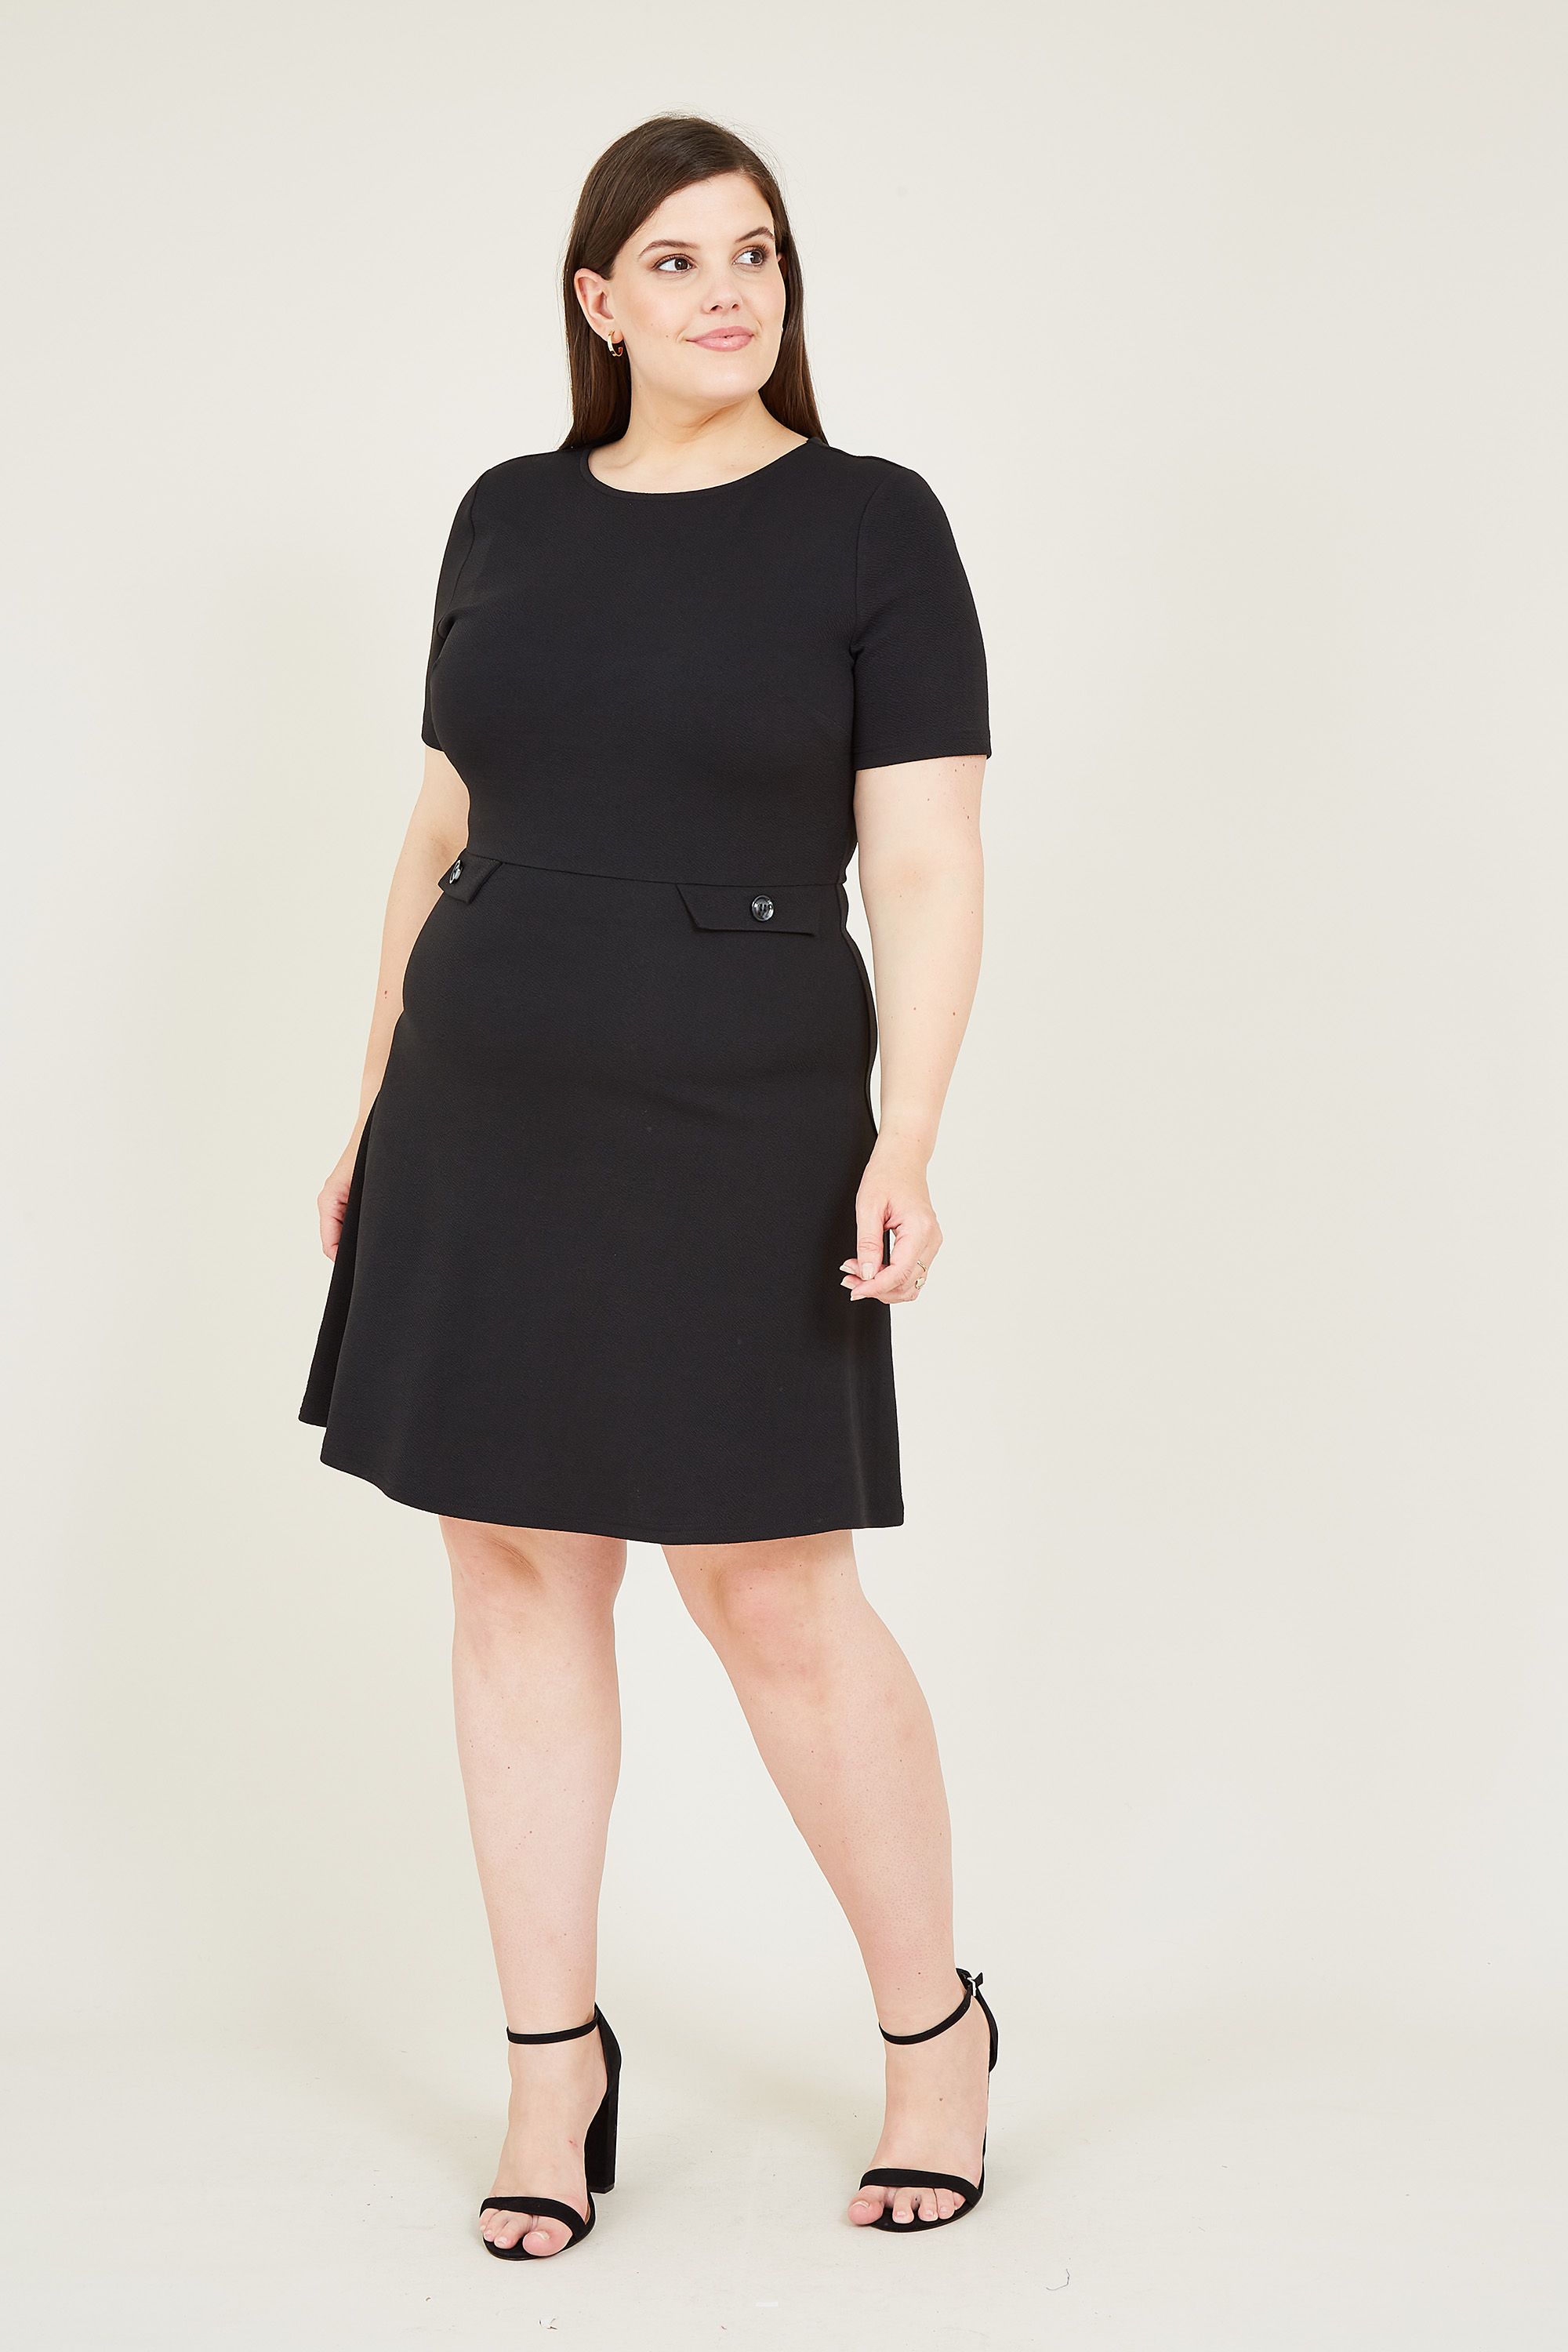 Perfect for work and weekends, this Mela Plus Size Pocket Skater Dress is a wardrobe staple. Cut in the classic skater shape, it's enhanced by short sleeves and pockets on the waist. Finished with a round neckline and a soft-touch finish, team with heels for dressier moments.